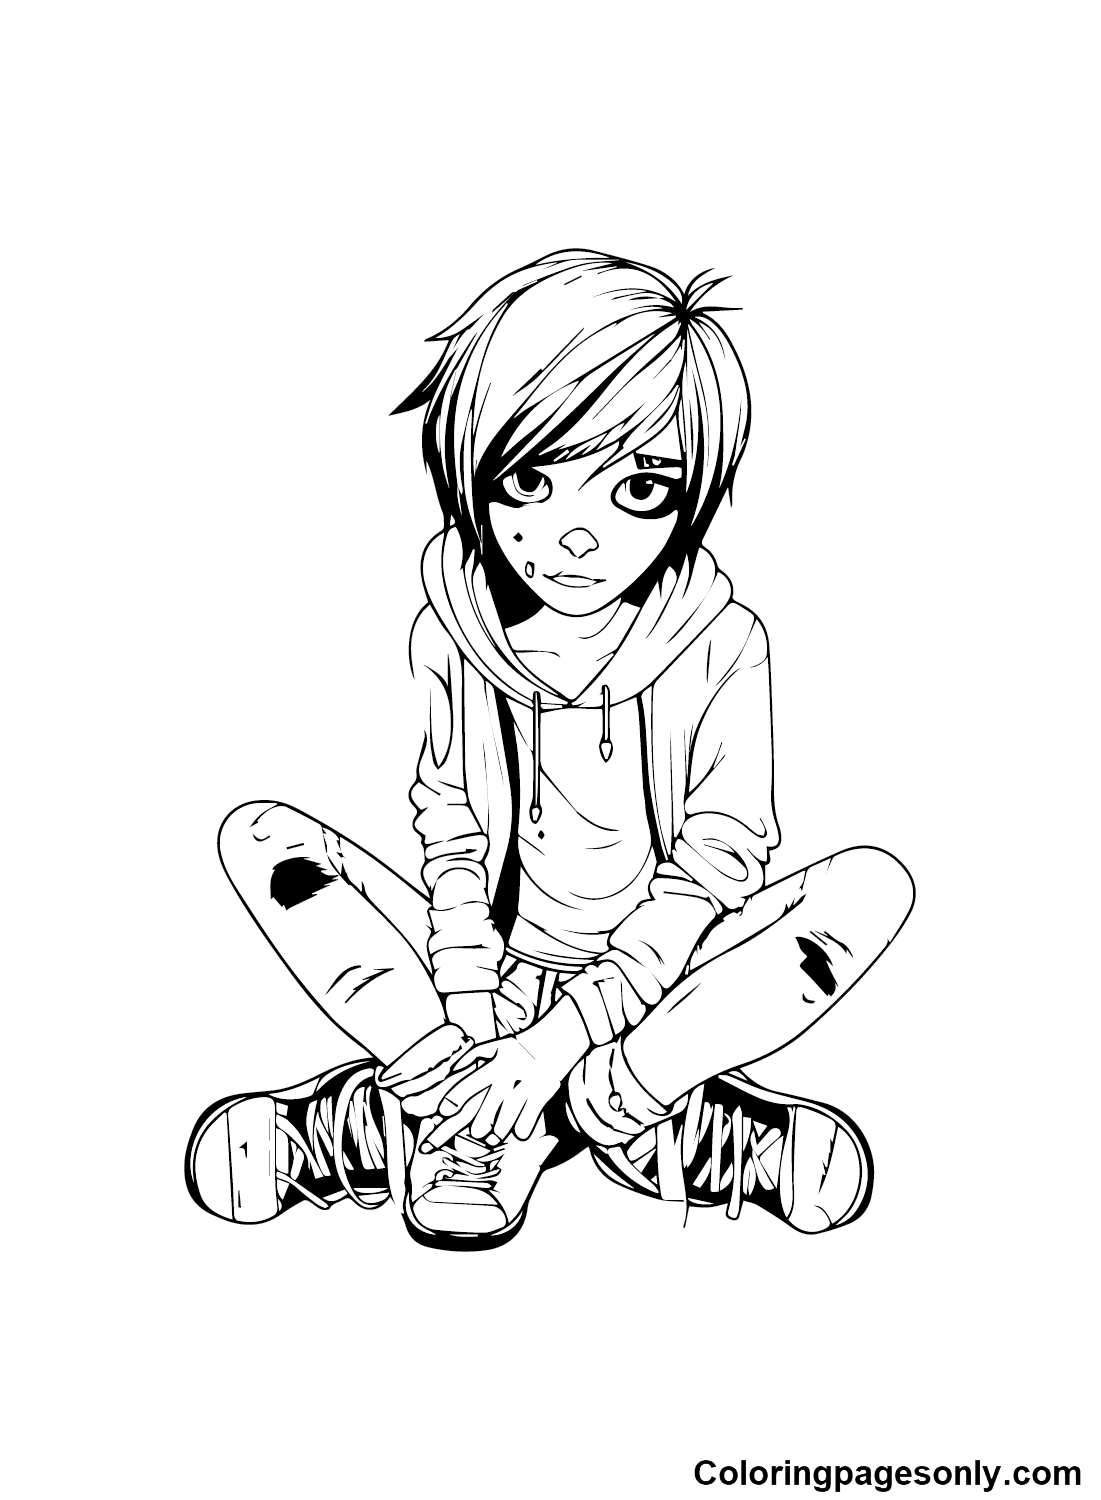 Emo to Print Coloring Page